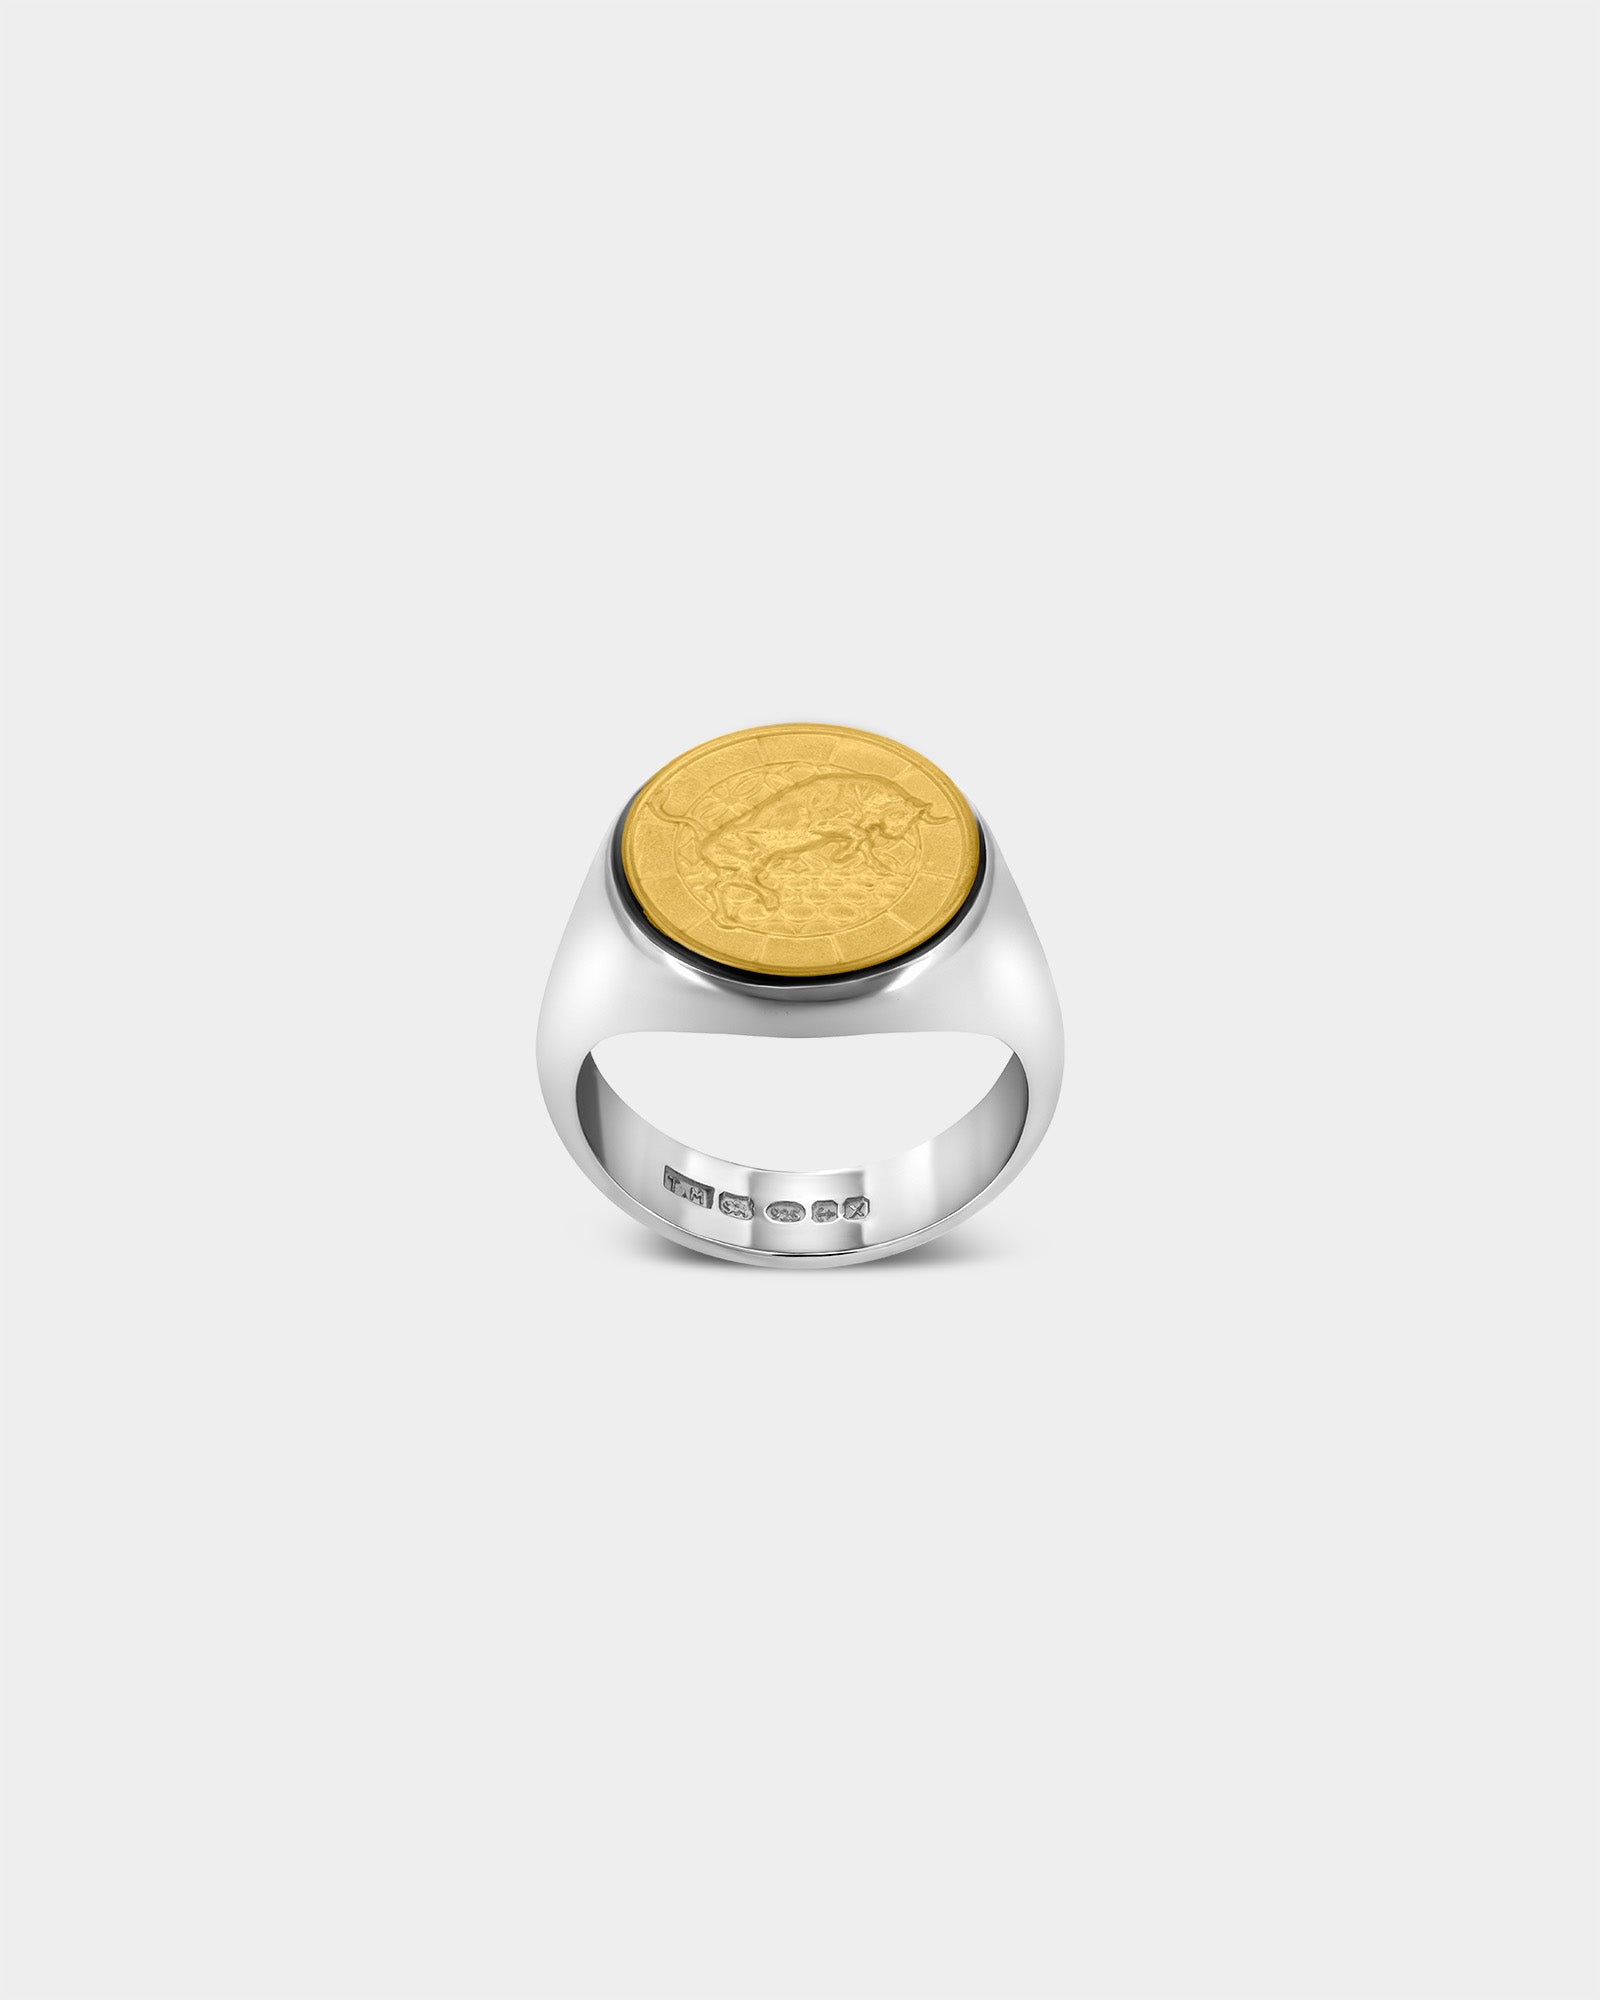 The Bull Large Signet Ring in Sterling Silver / 9k Yellow Gold by Wilson Grant